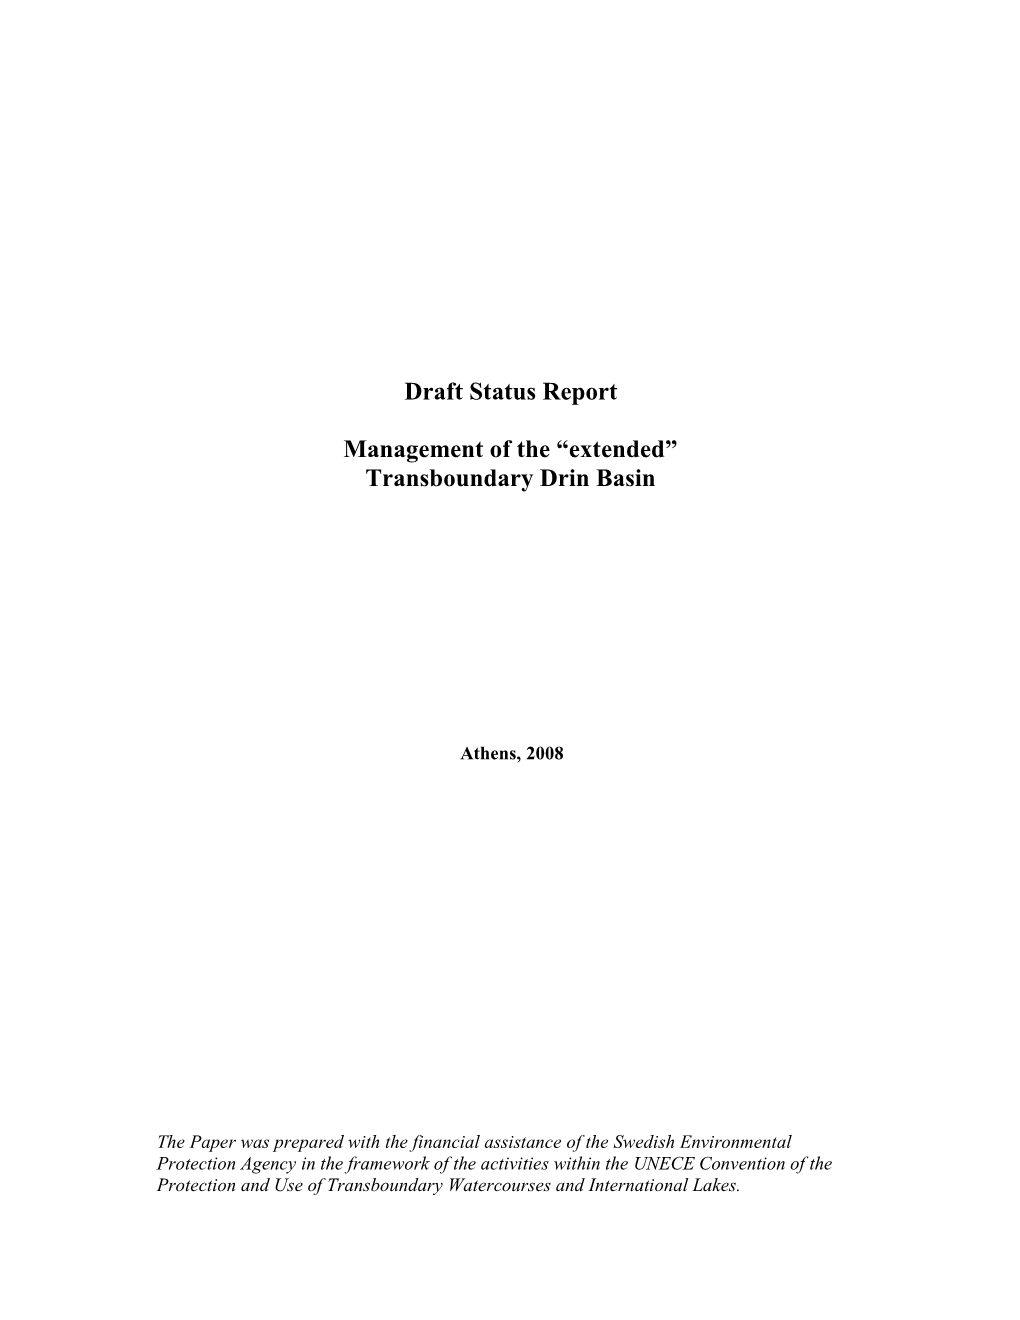 Draft Status Report Management of the “Extended” Transboundary Drin